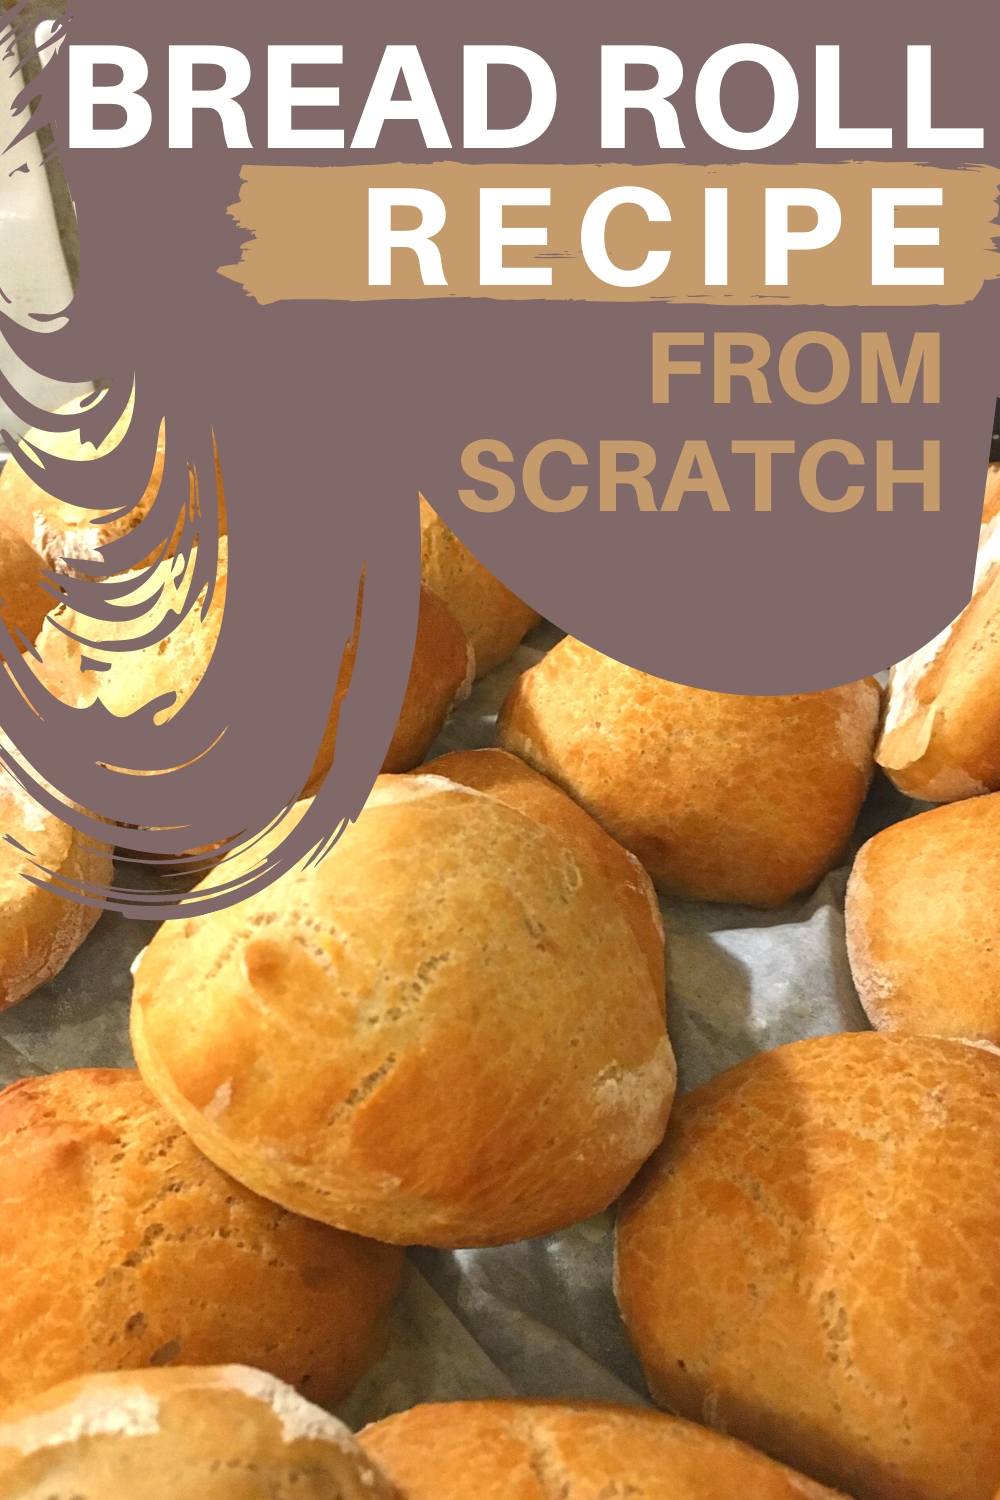 picutre of bread rolls with the caption bread roll recipe from scratch